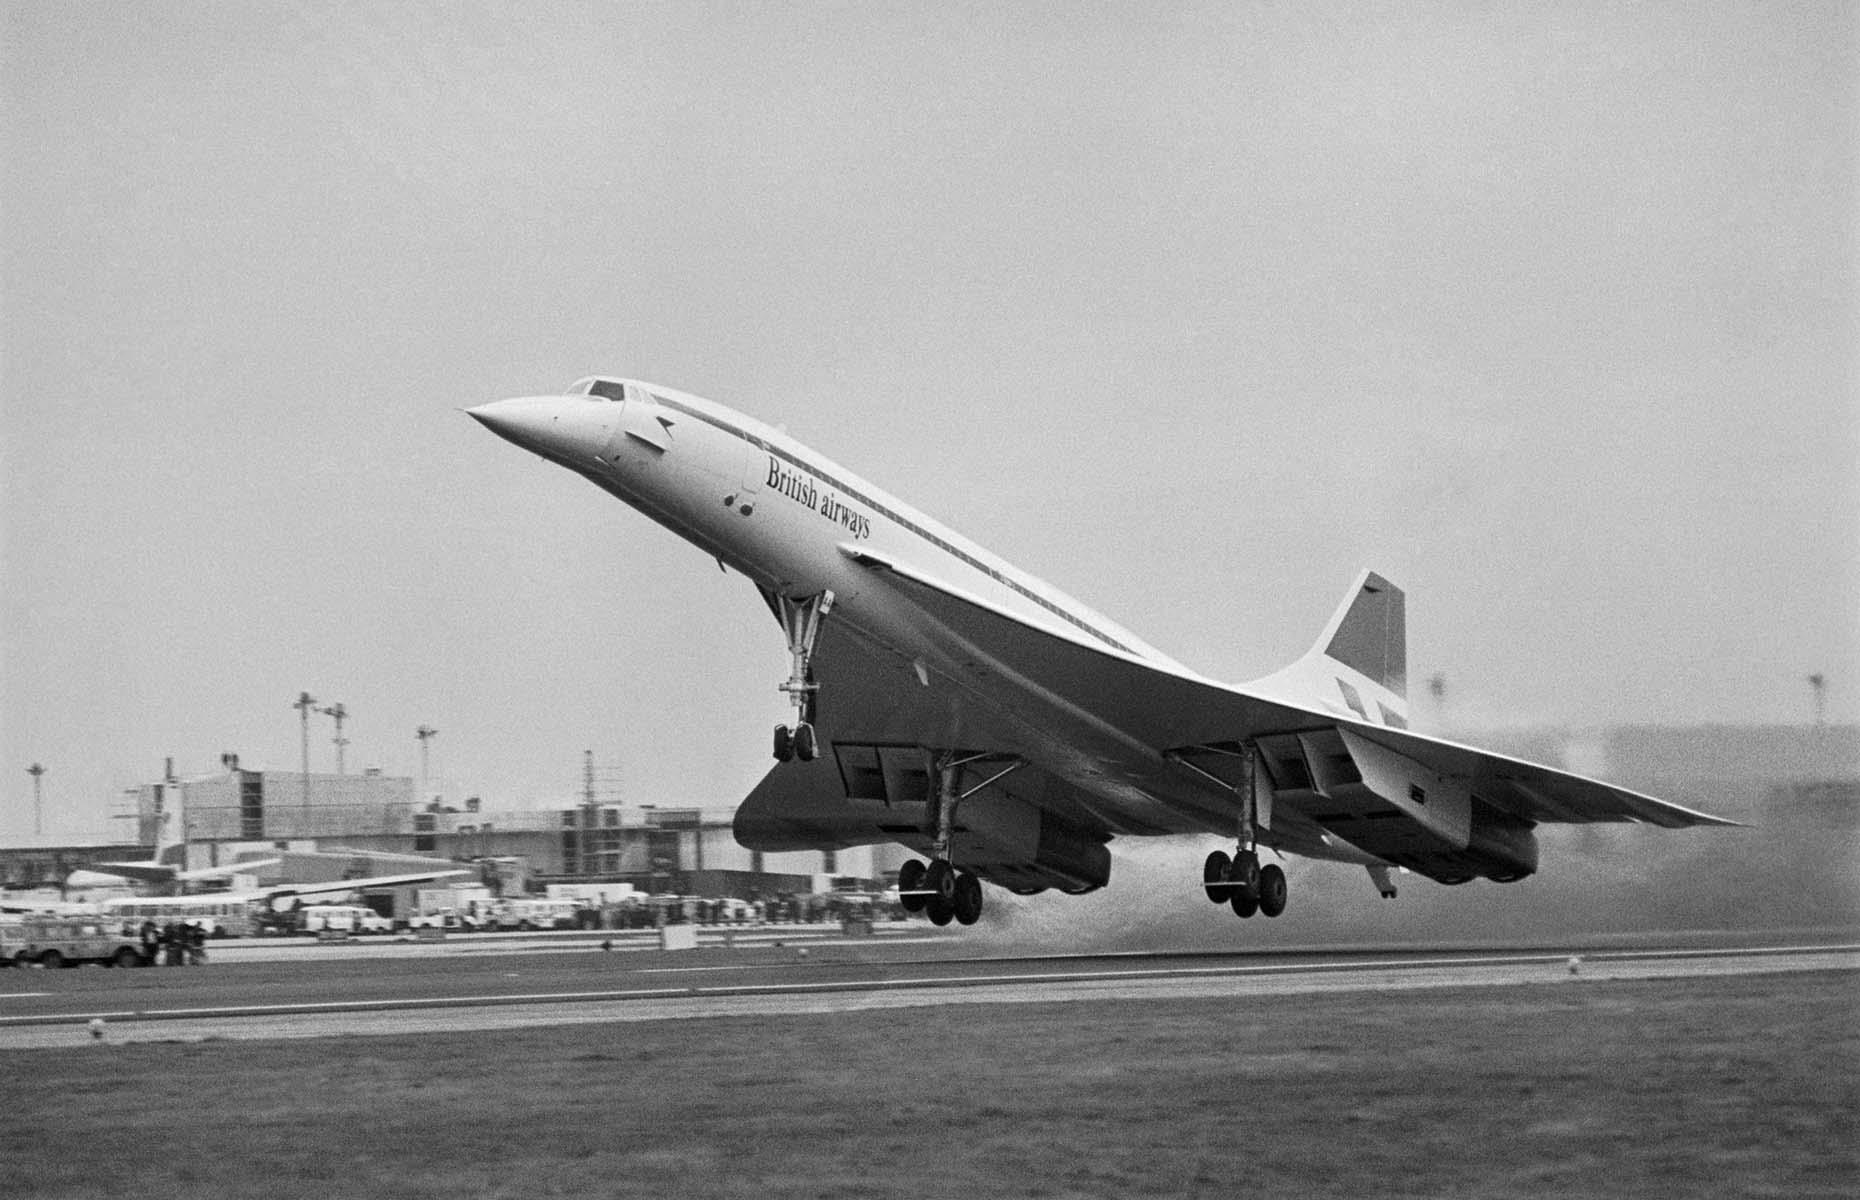 The ultimate iconic airliner, Concorde was a joint effort between British and French aero-engineering firms who made the dream of supersonic travel a reality. Launched in 1969, Concorde travelled faster than the speed of sound and could fly between London and New York City in around three-and-a-half hours (Concorde's transatlantic record was just two hours and 52 minutes). Only 20 of these groundbreaking jets were built, and all were operated by either British Airways or Air France.